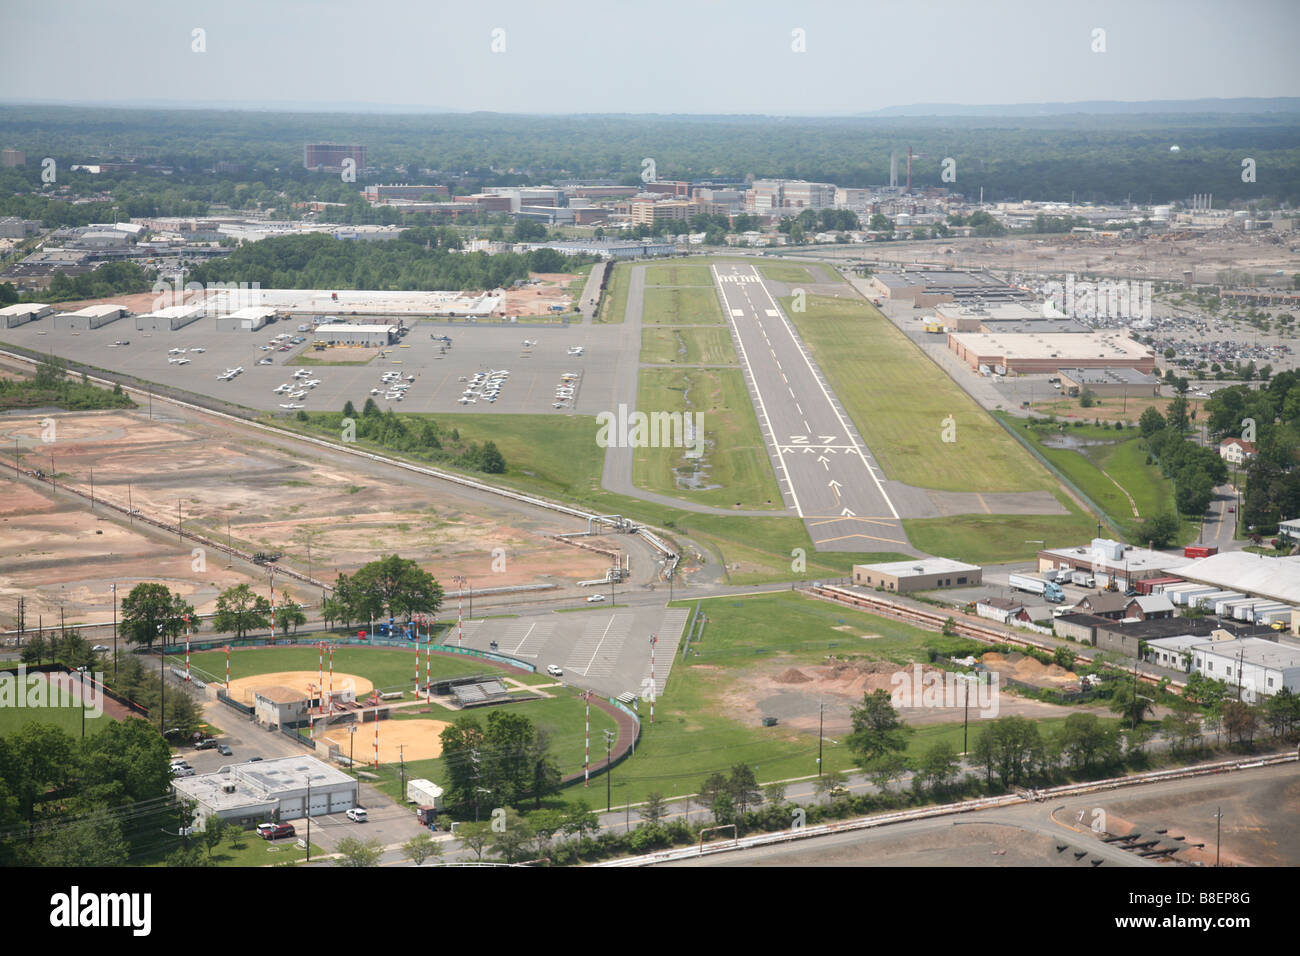 Aerial view of Linden Airport located in Union County, New Jersey Stock Photo